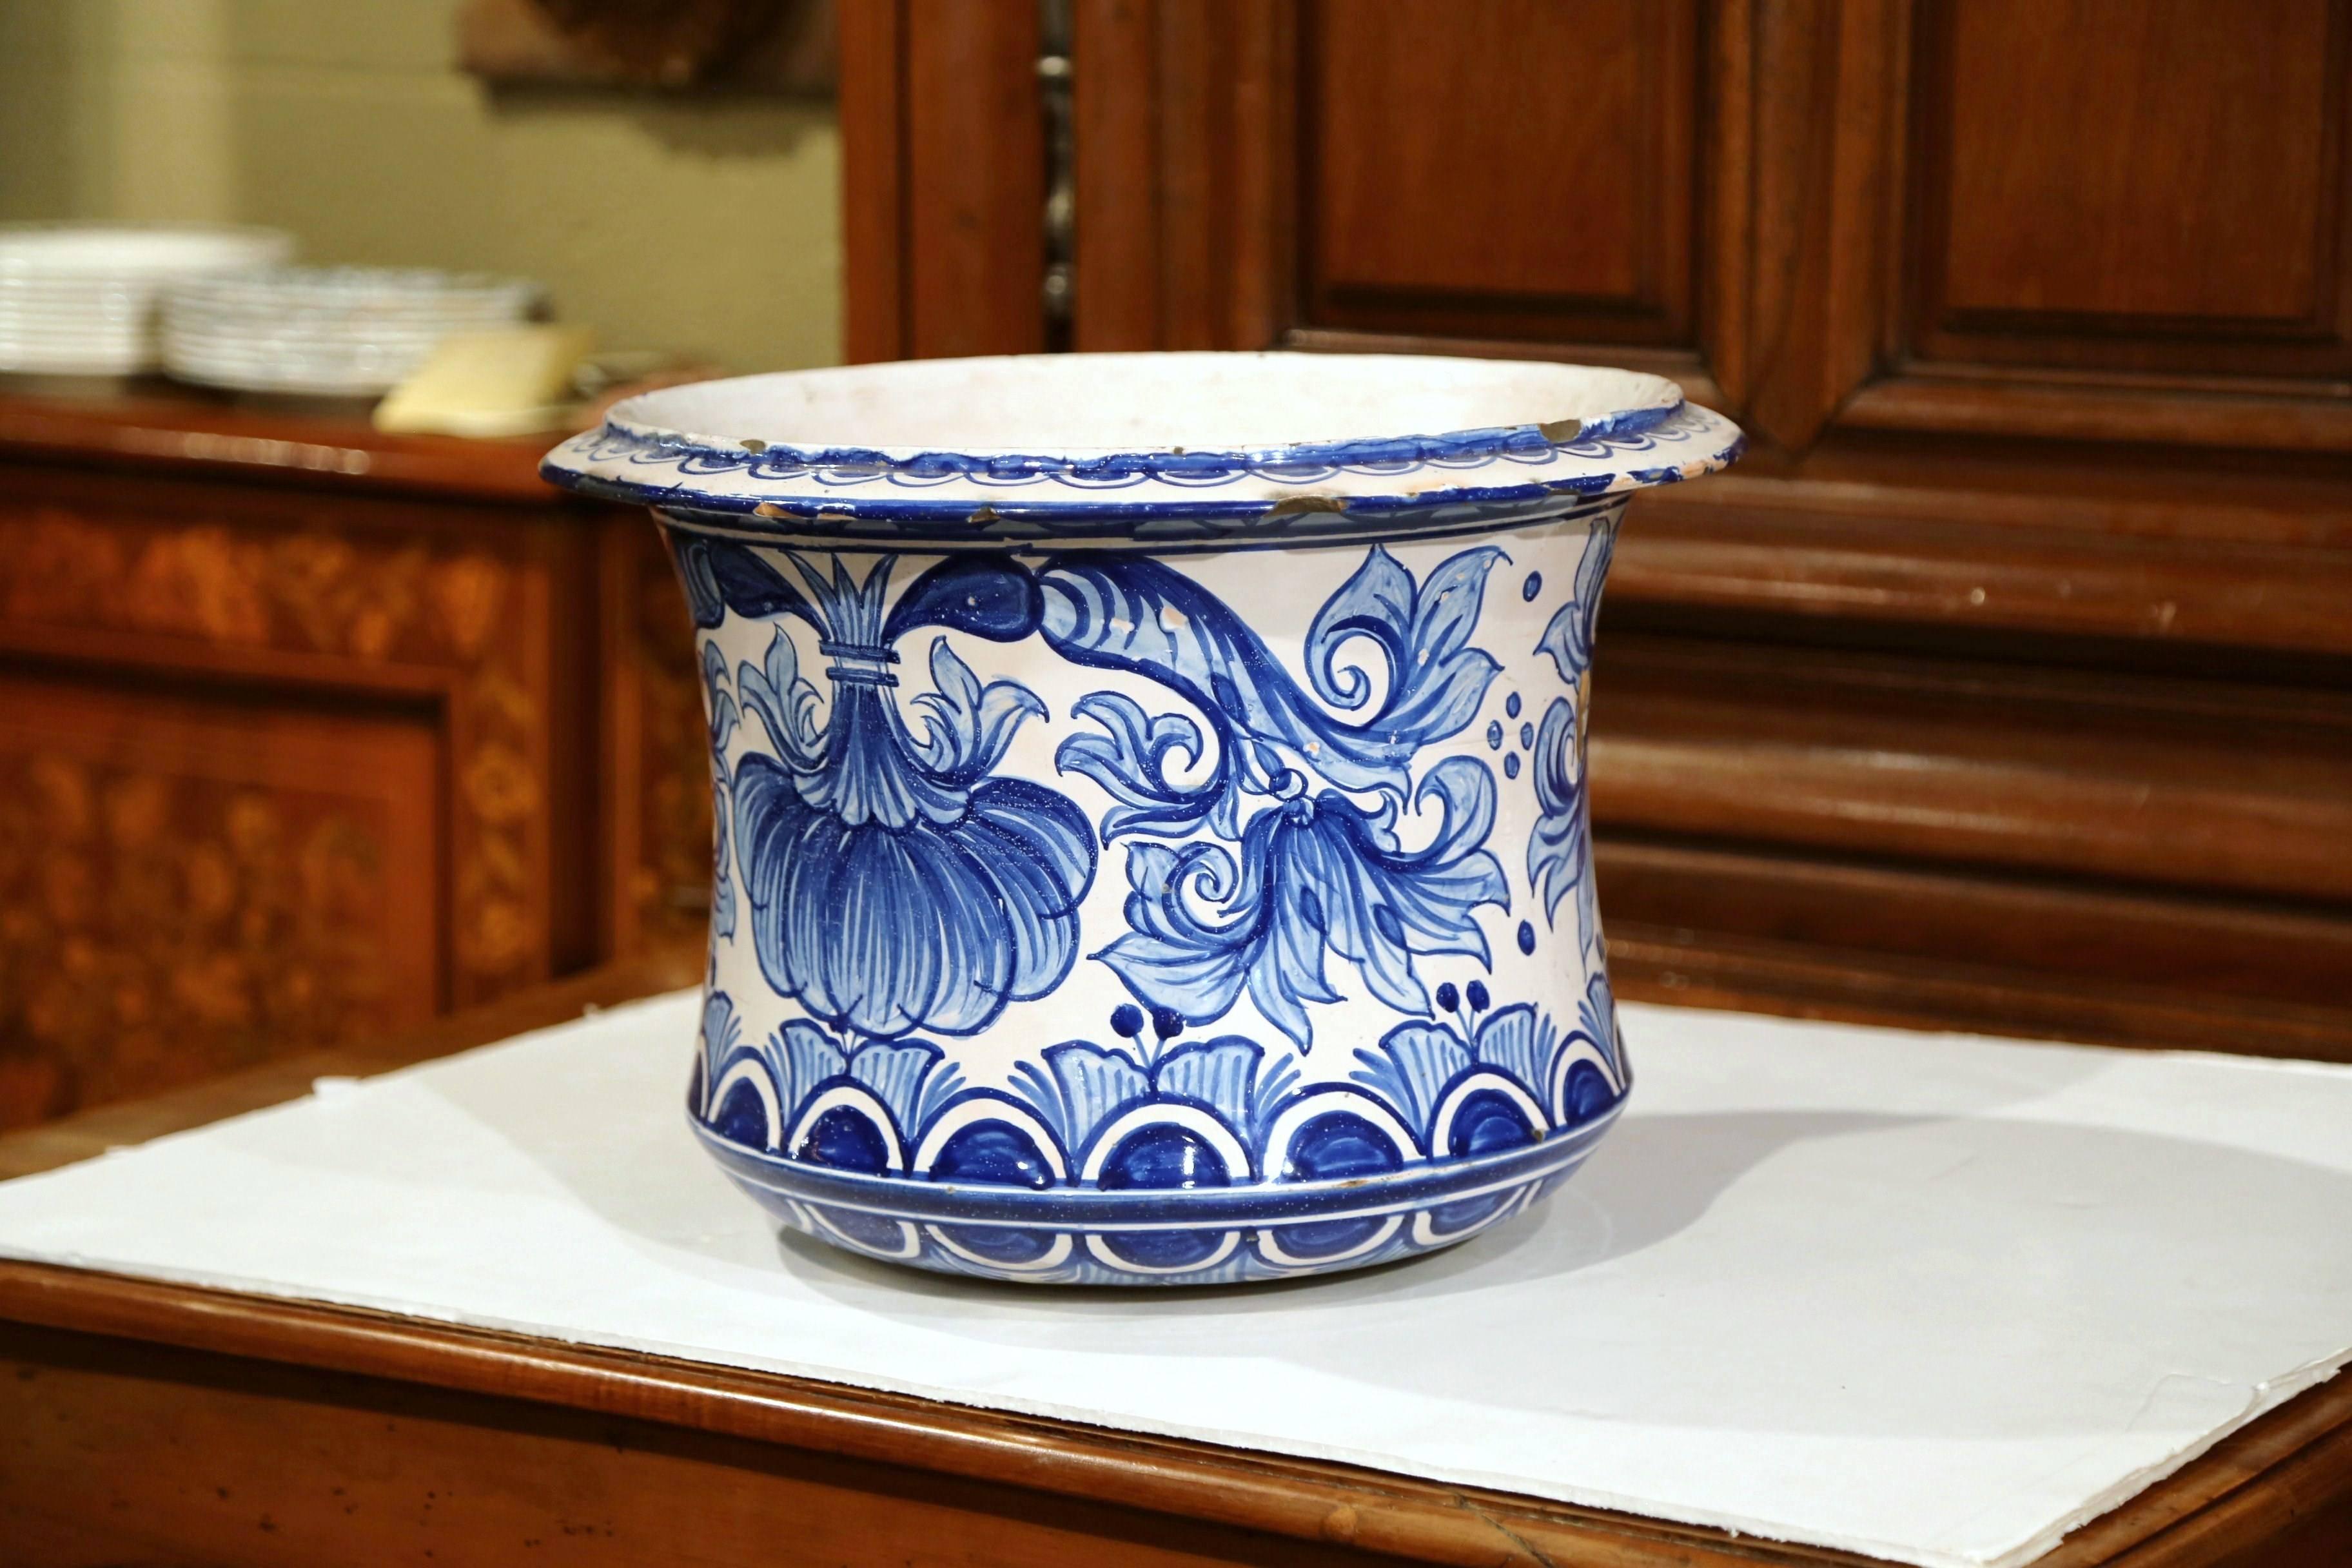 This elegant, antique faience planter was crafted in Nevers, France, circa 1850. The large, porcelain cache-pot features hand-painted flowers and leaves in a traditional blue and white palette. The ceramic vase is in good condition commensurate with